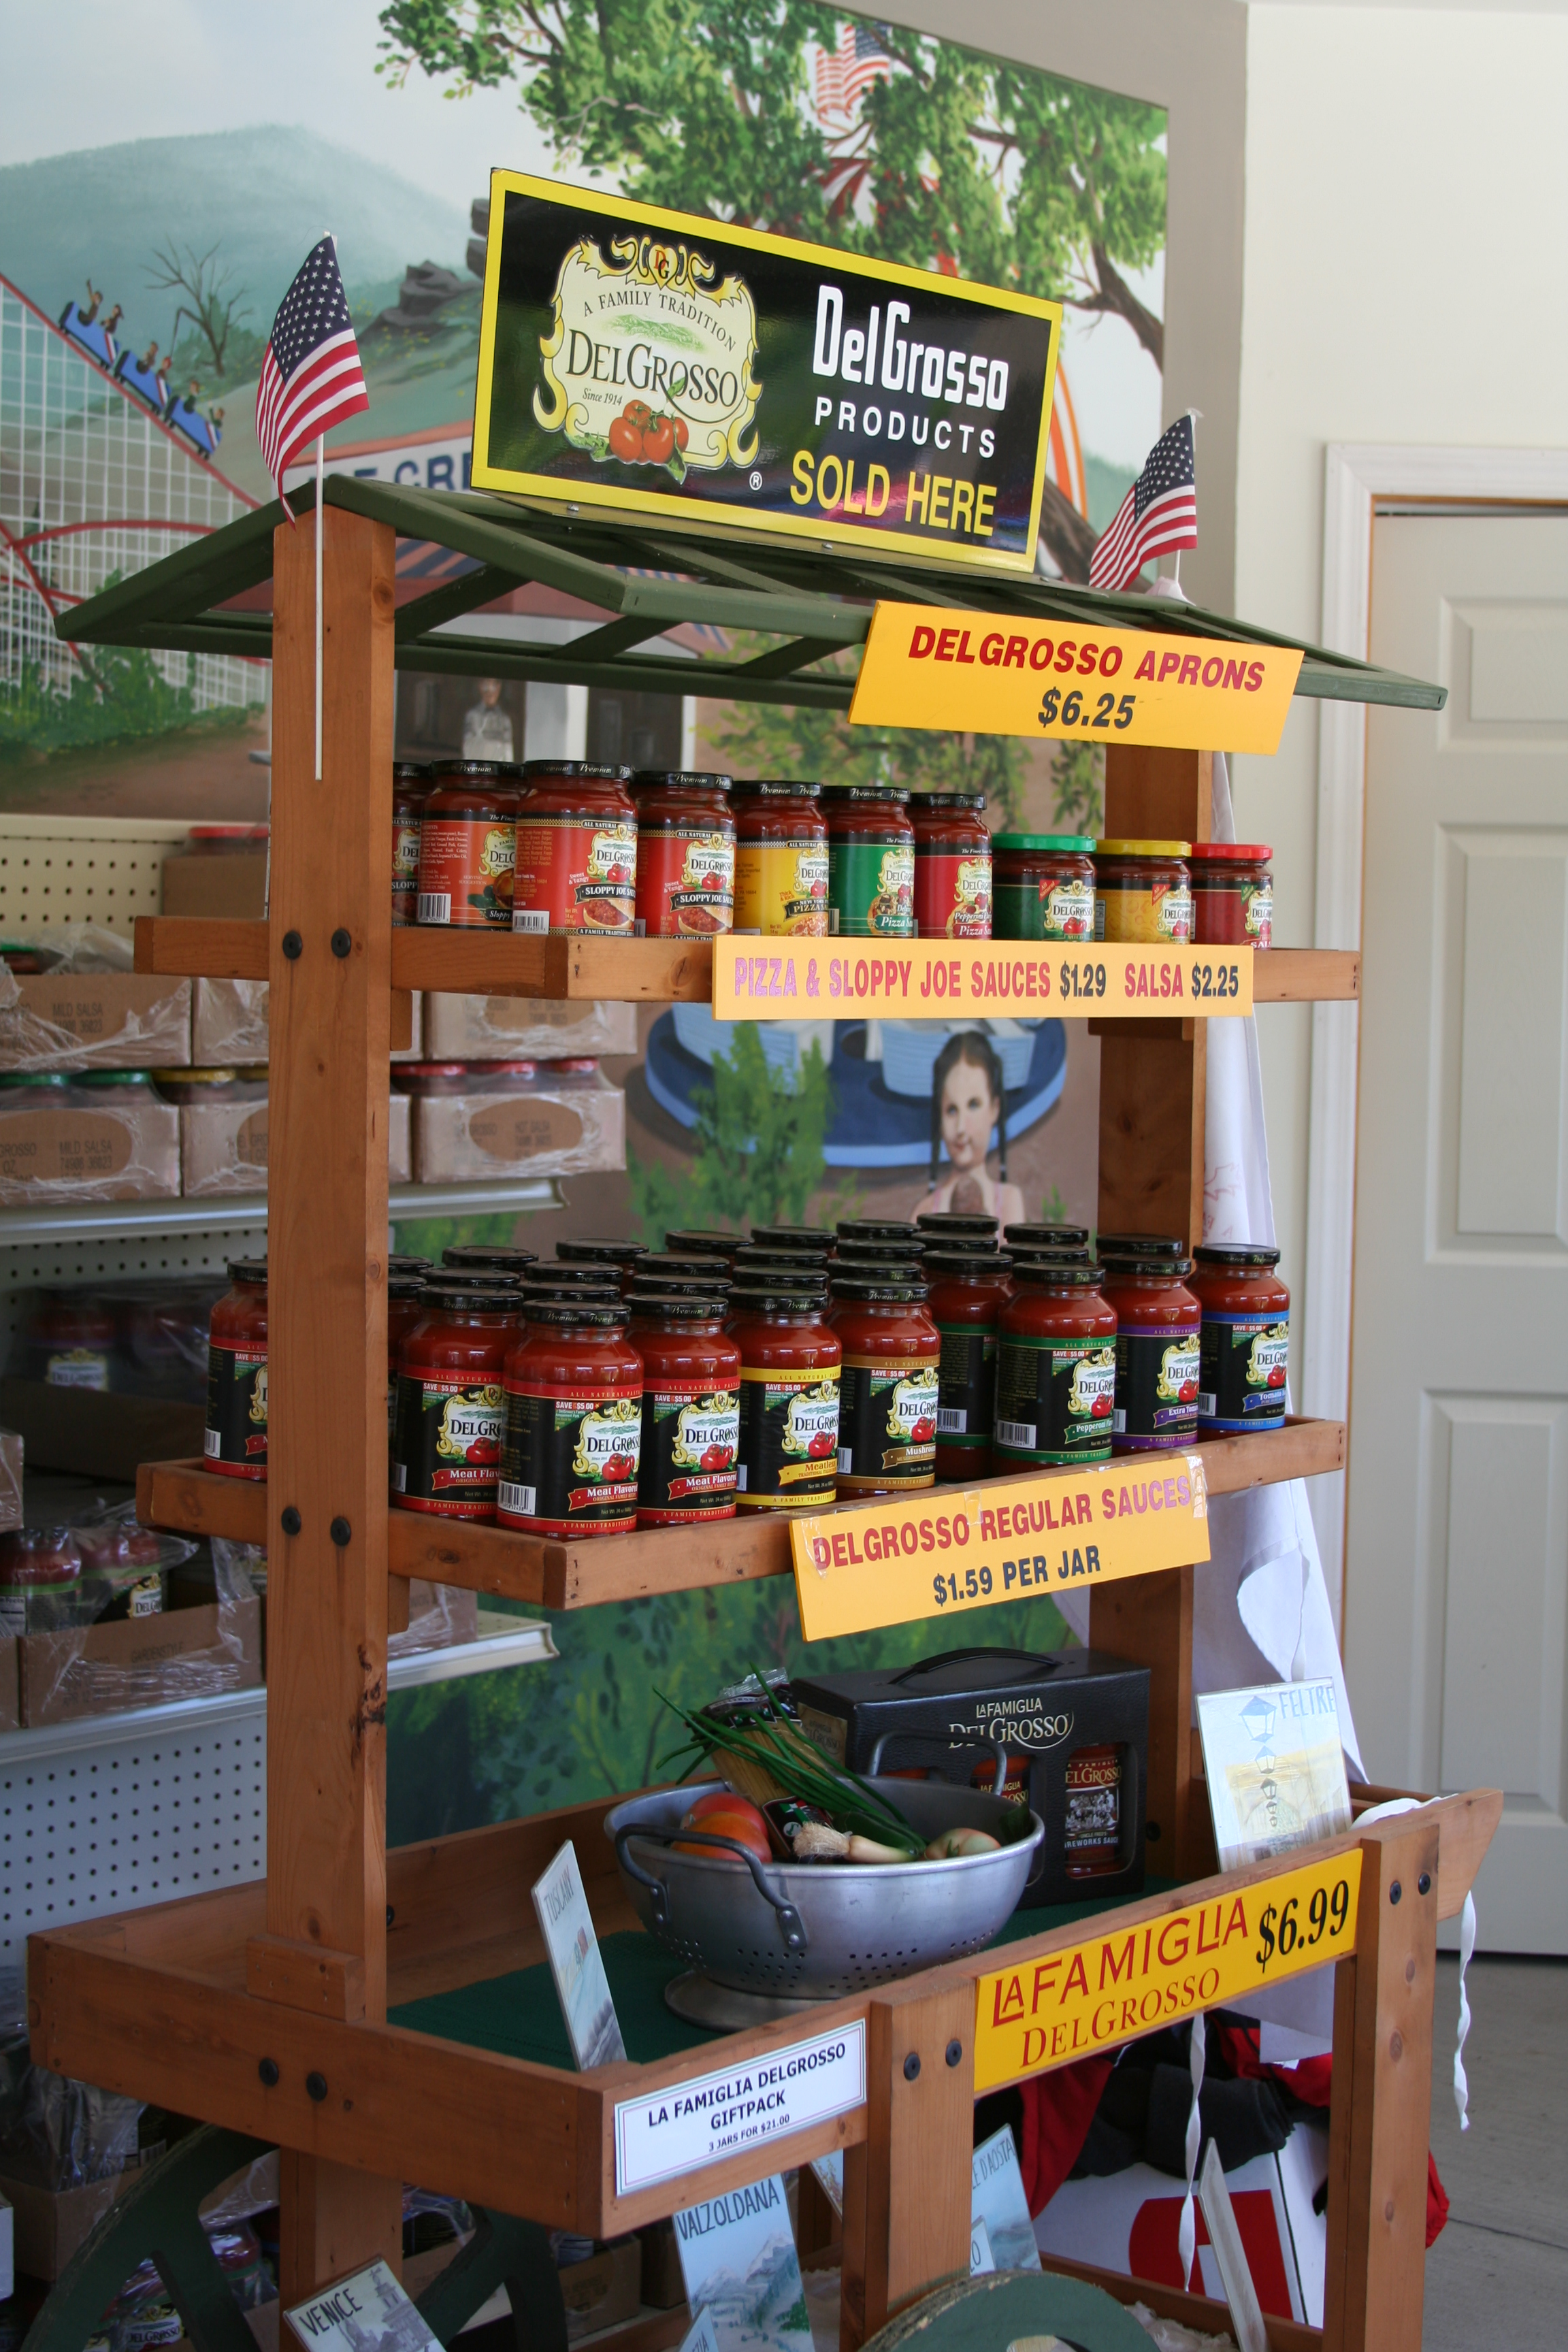 Gallery of DelGrosso's sauces